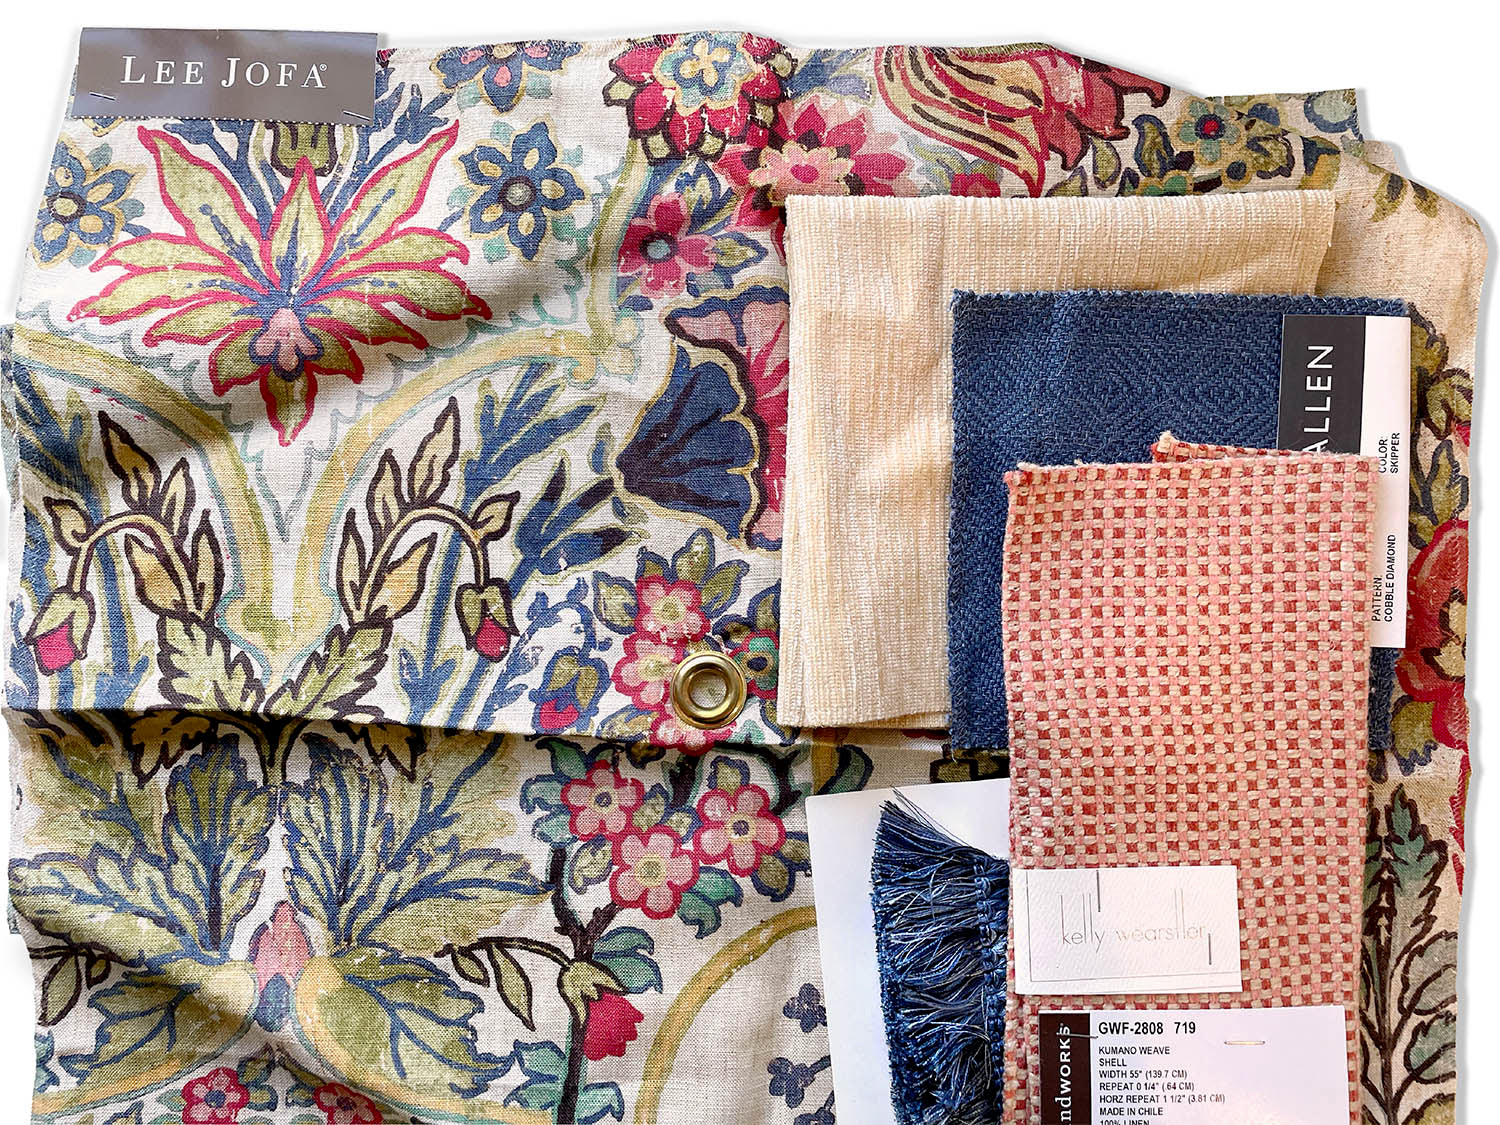 Interior design materials are layered on top of one another. Lee Jofa printed fabric with blue, yellow, red, and green botanicals. Solid off white chenille, solid blue twill, pink and red check, and blue fringe trim.